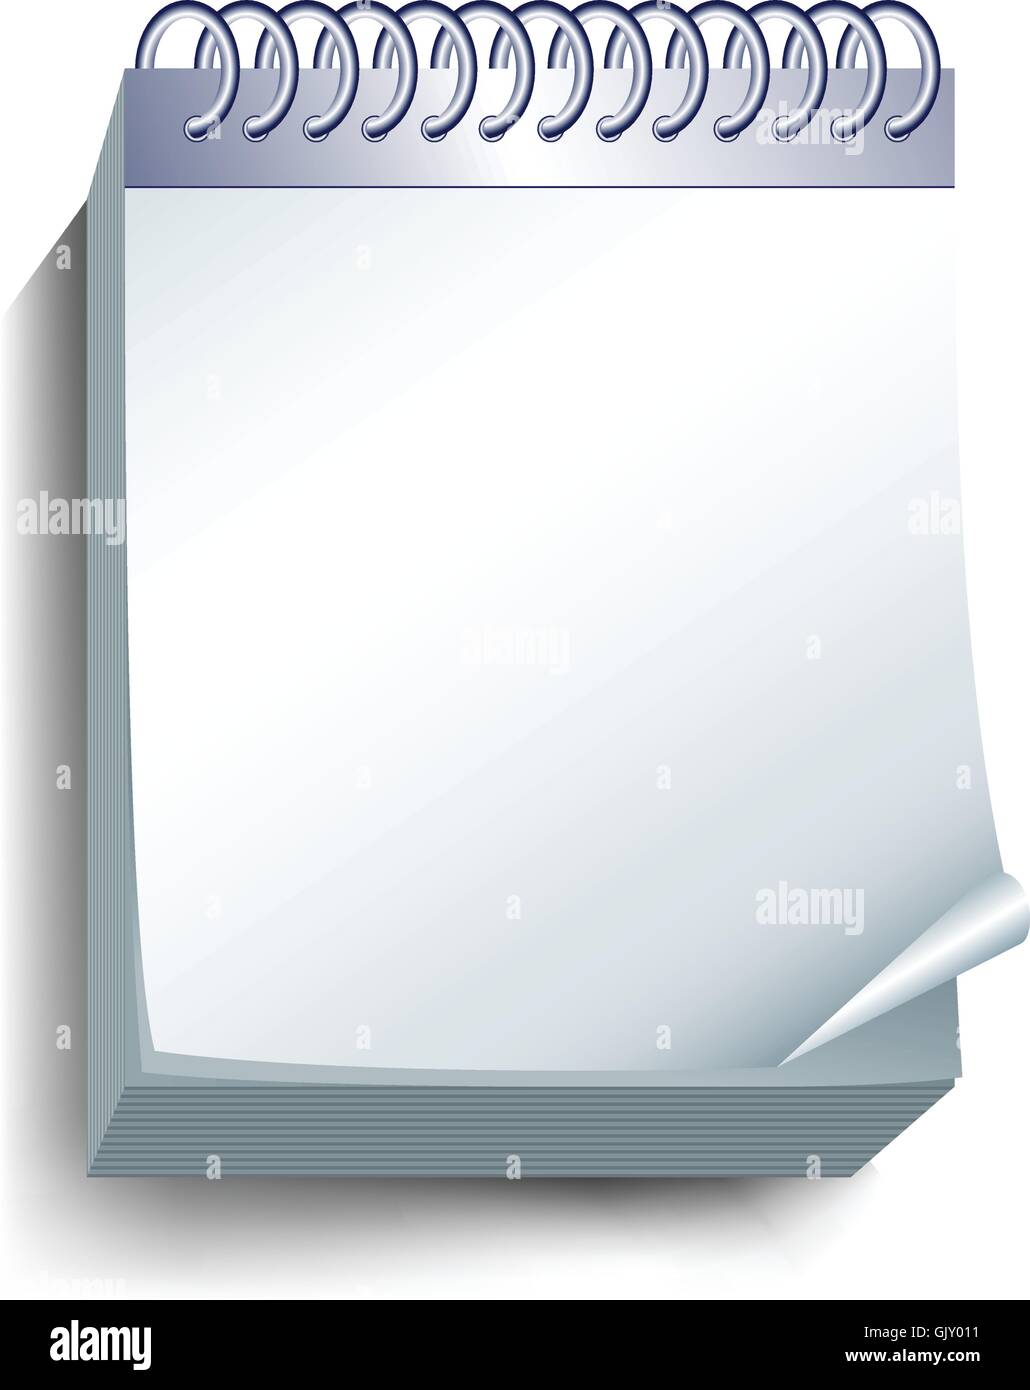 White Blank Hole Punched Paper Block For 3 Ring Binder Vector